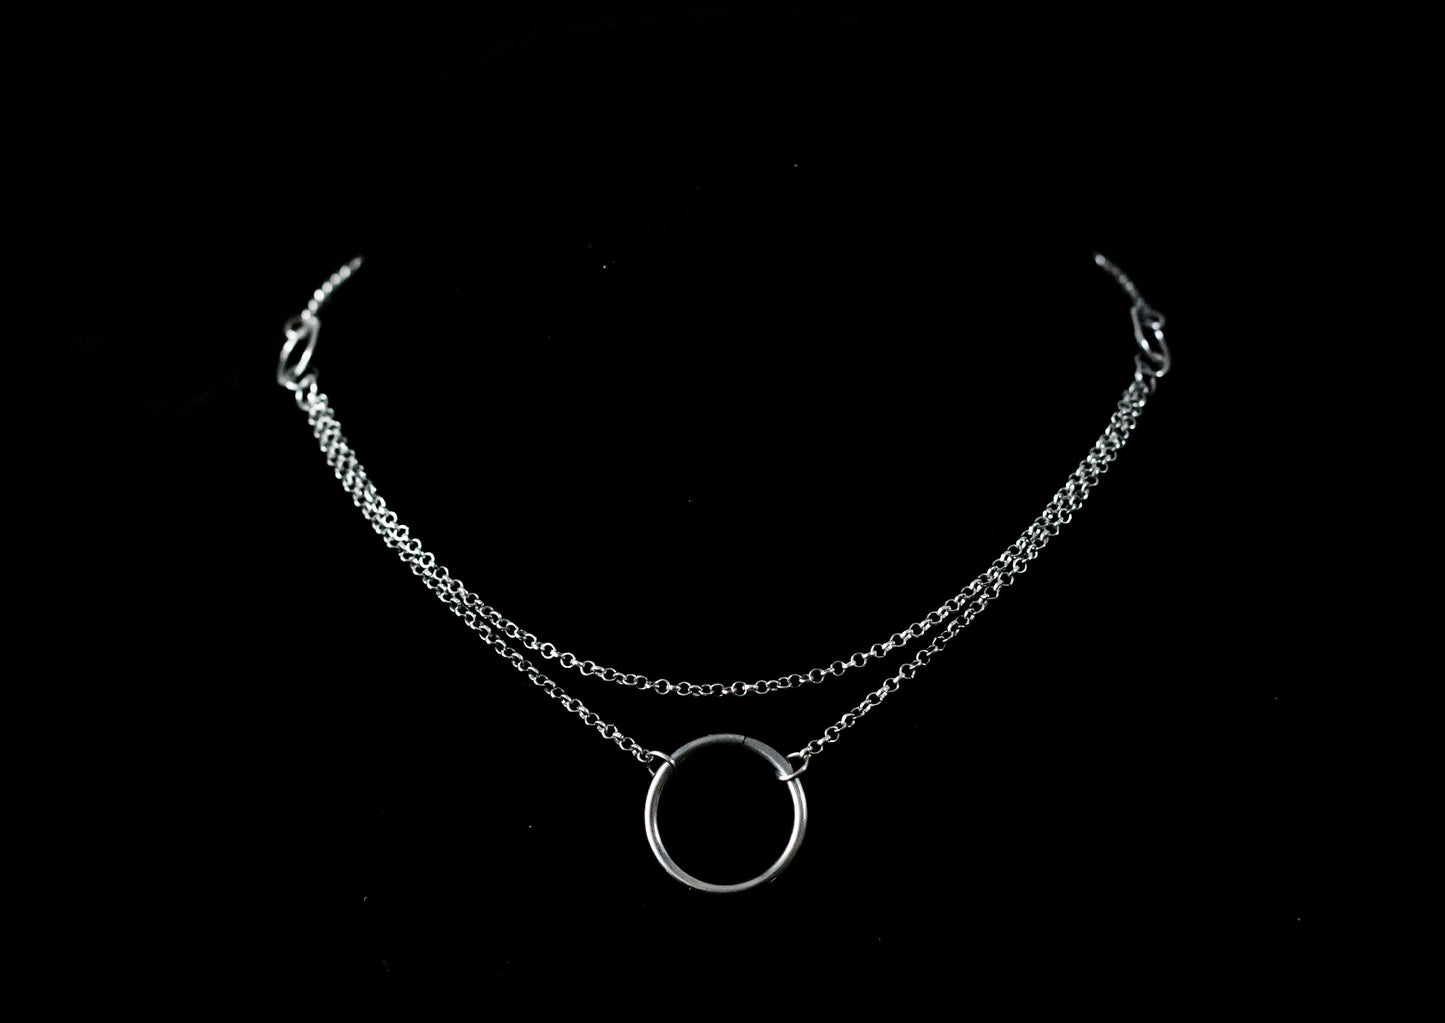 Elegant Myril Jewels necklace featuring a minimalist o-ring centerpiece, capturing the essence of neo-gothic chic. Ideal for those embracing a dark avant-garde or whimsigoth style, perfect as a bold statement piece for everyday wear or as a distinctive goth girlfriend gift.